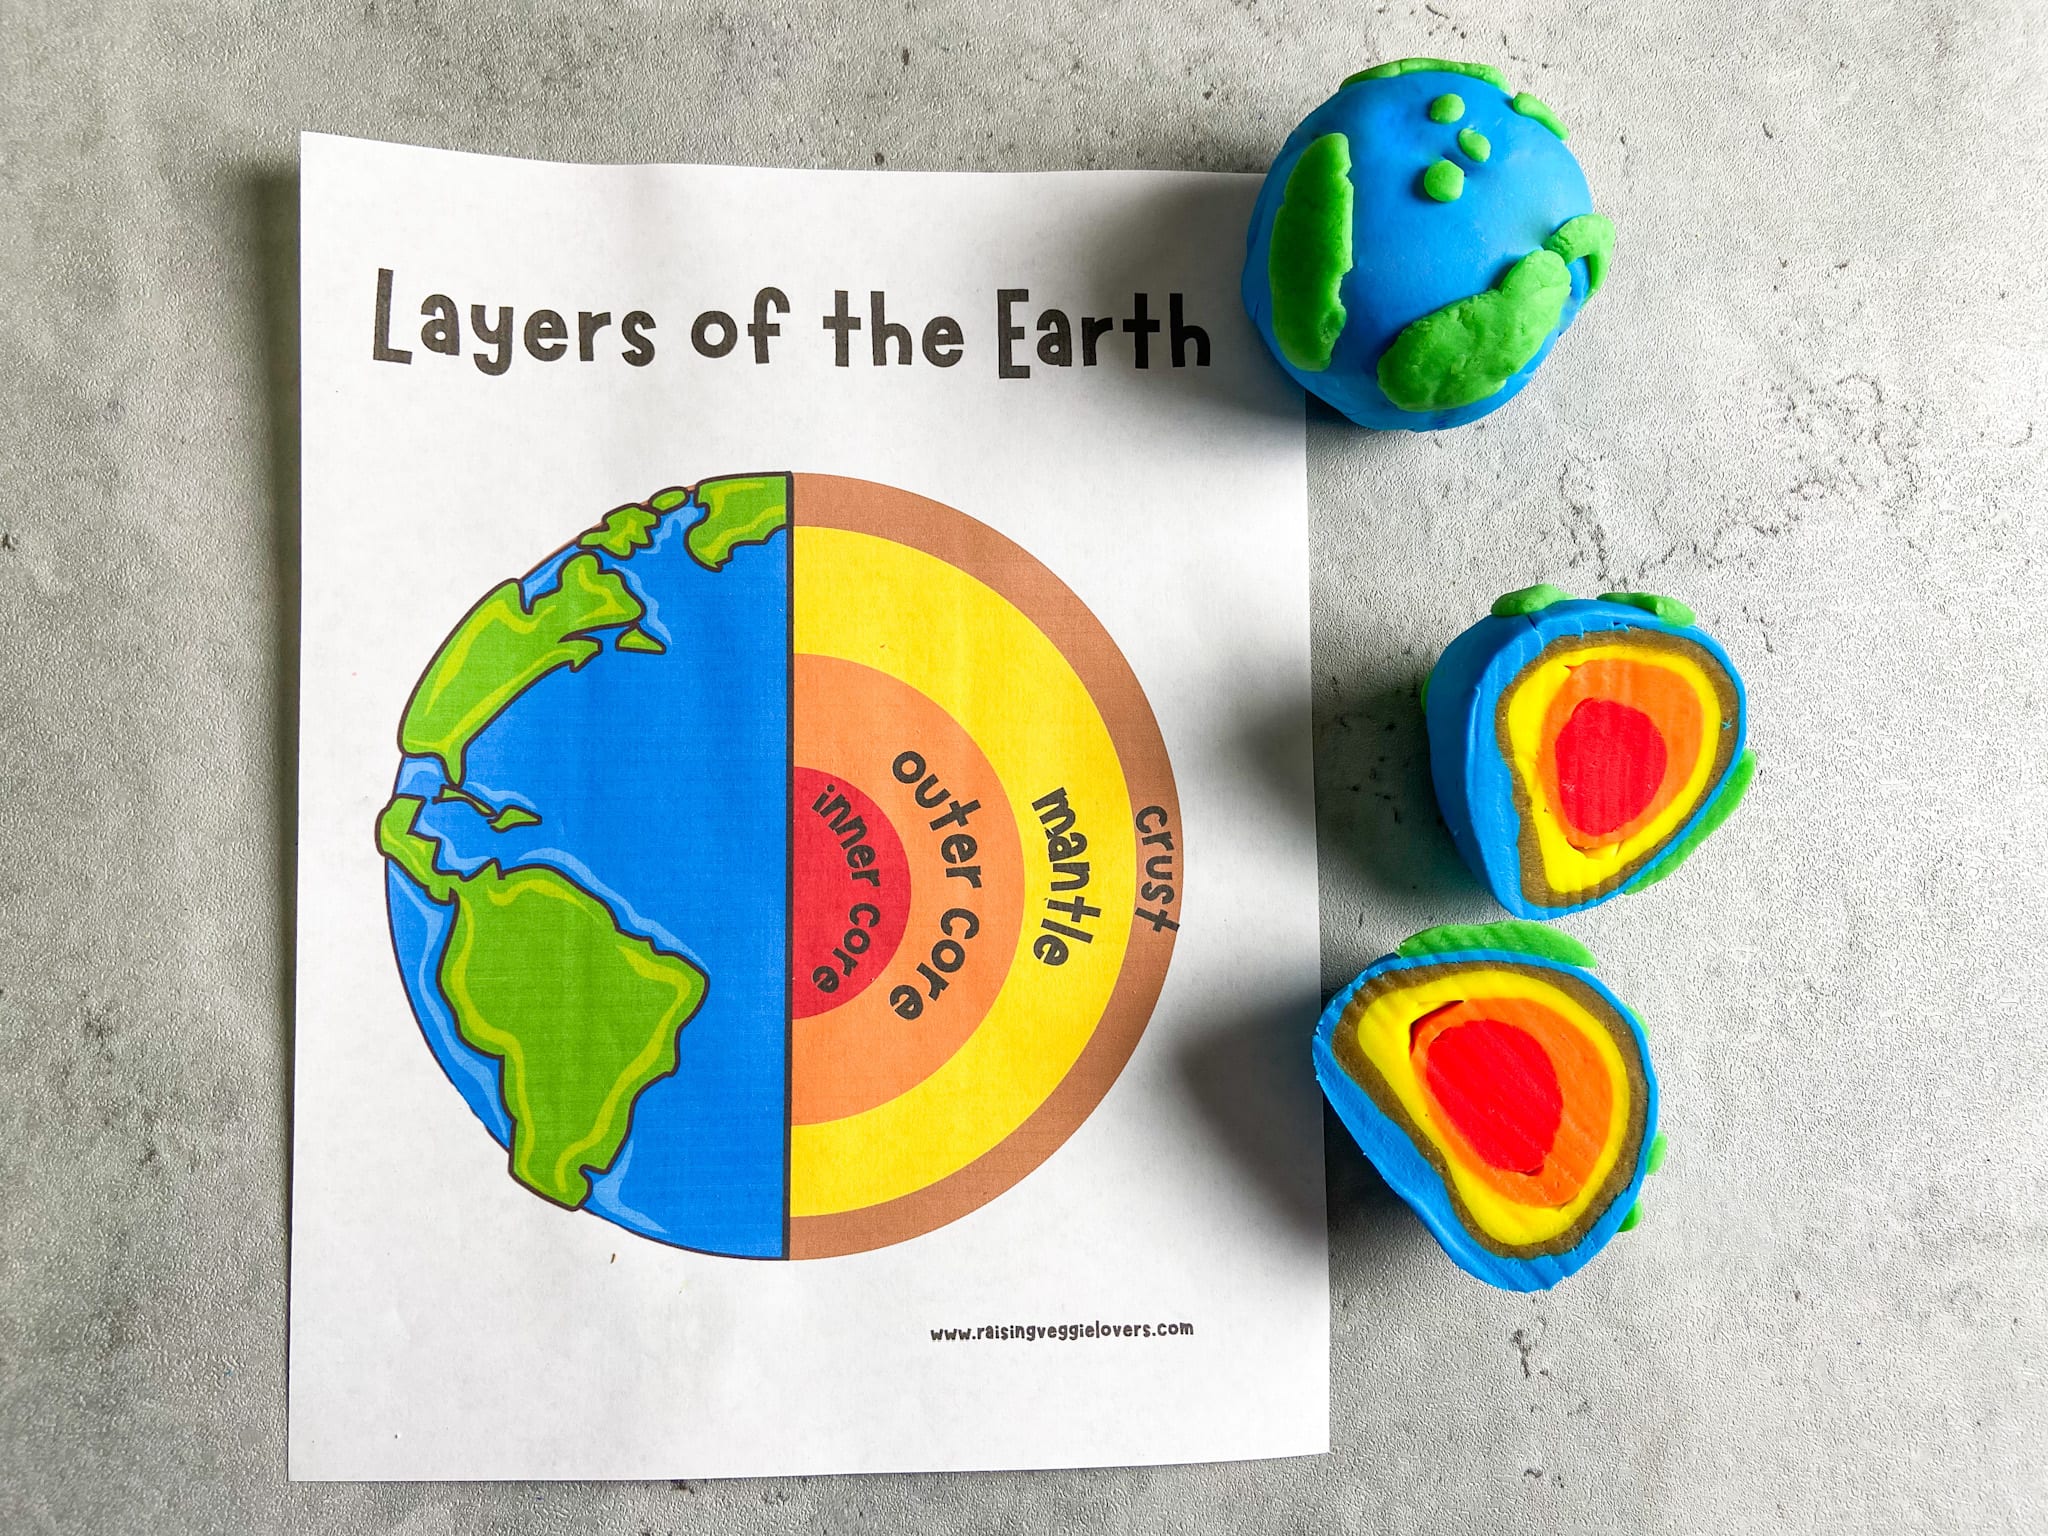 layers-of-the-earth-playdough-activity-with-free-printable-raising-veggie-lovers